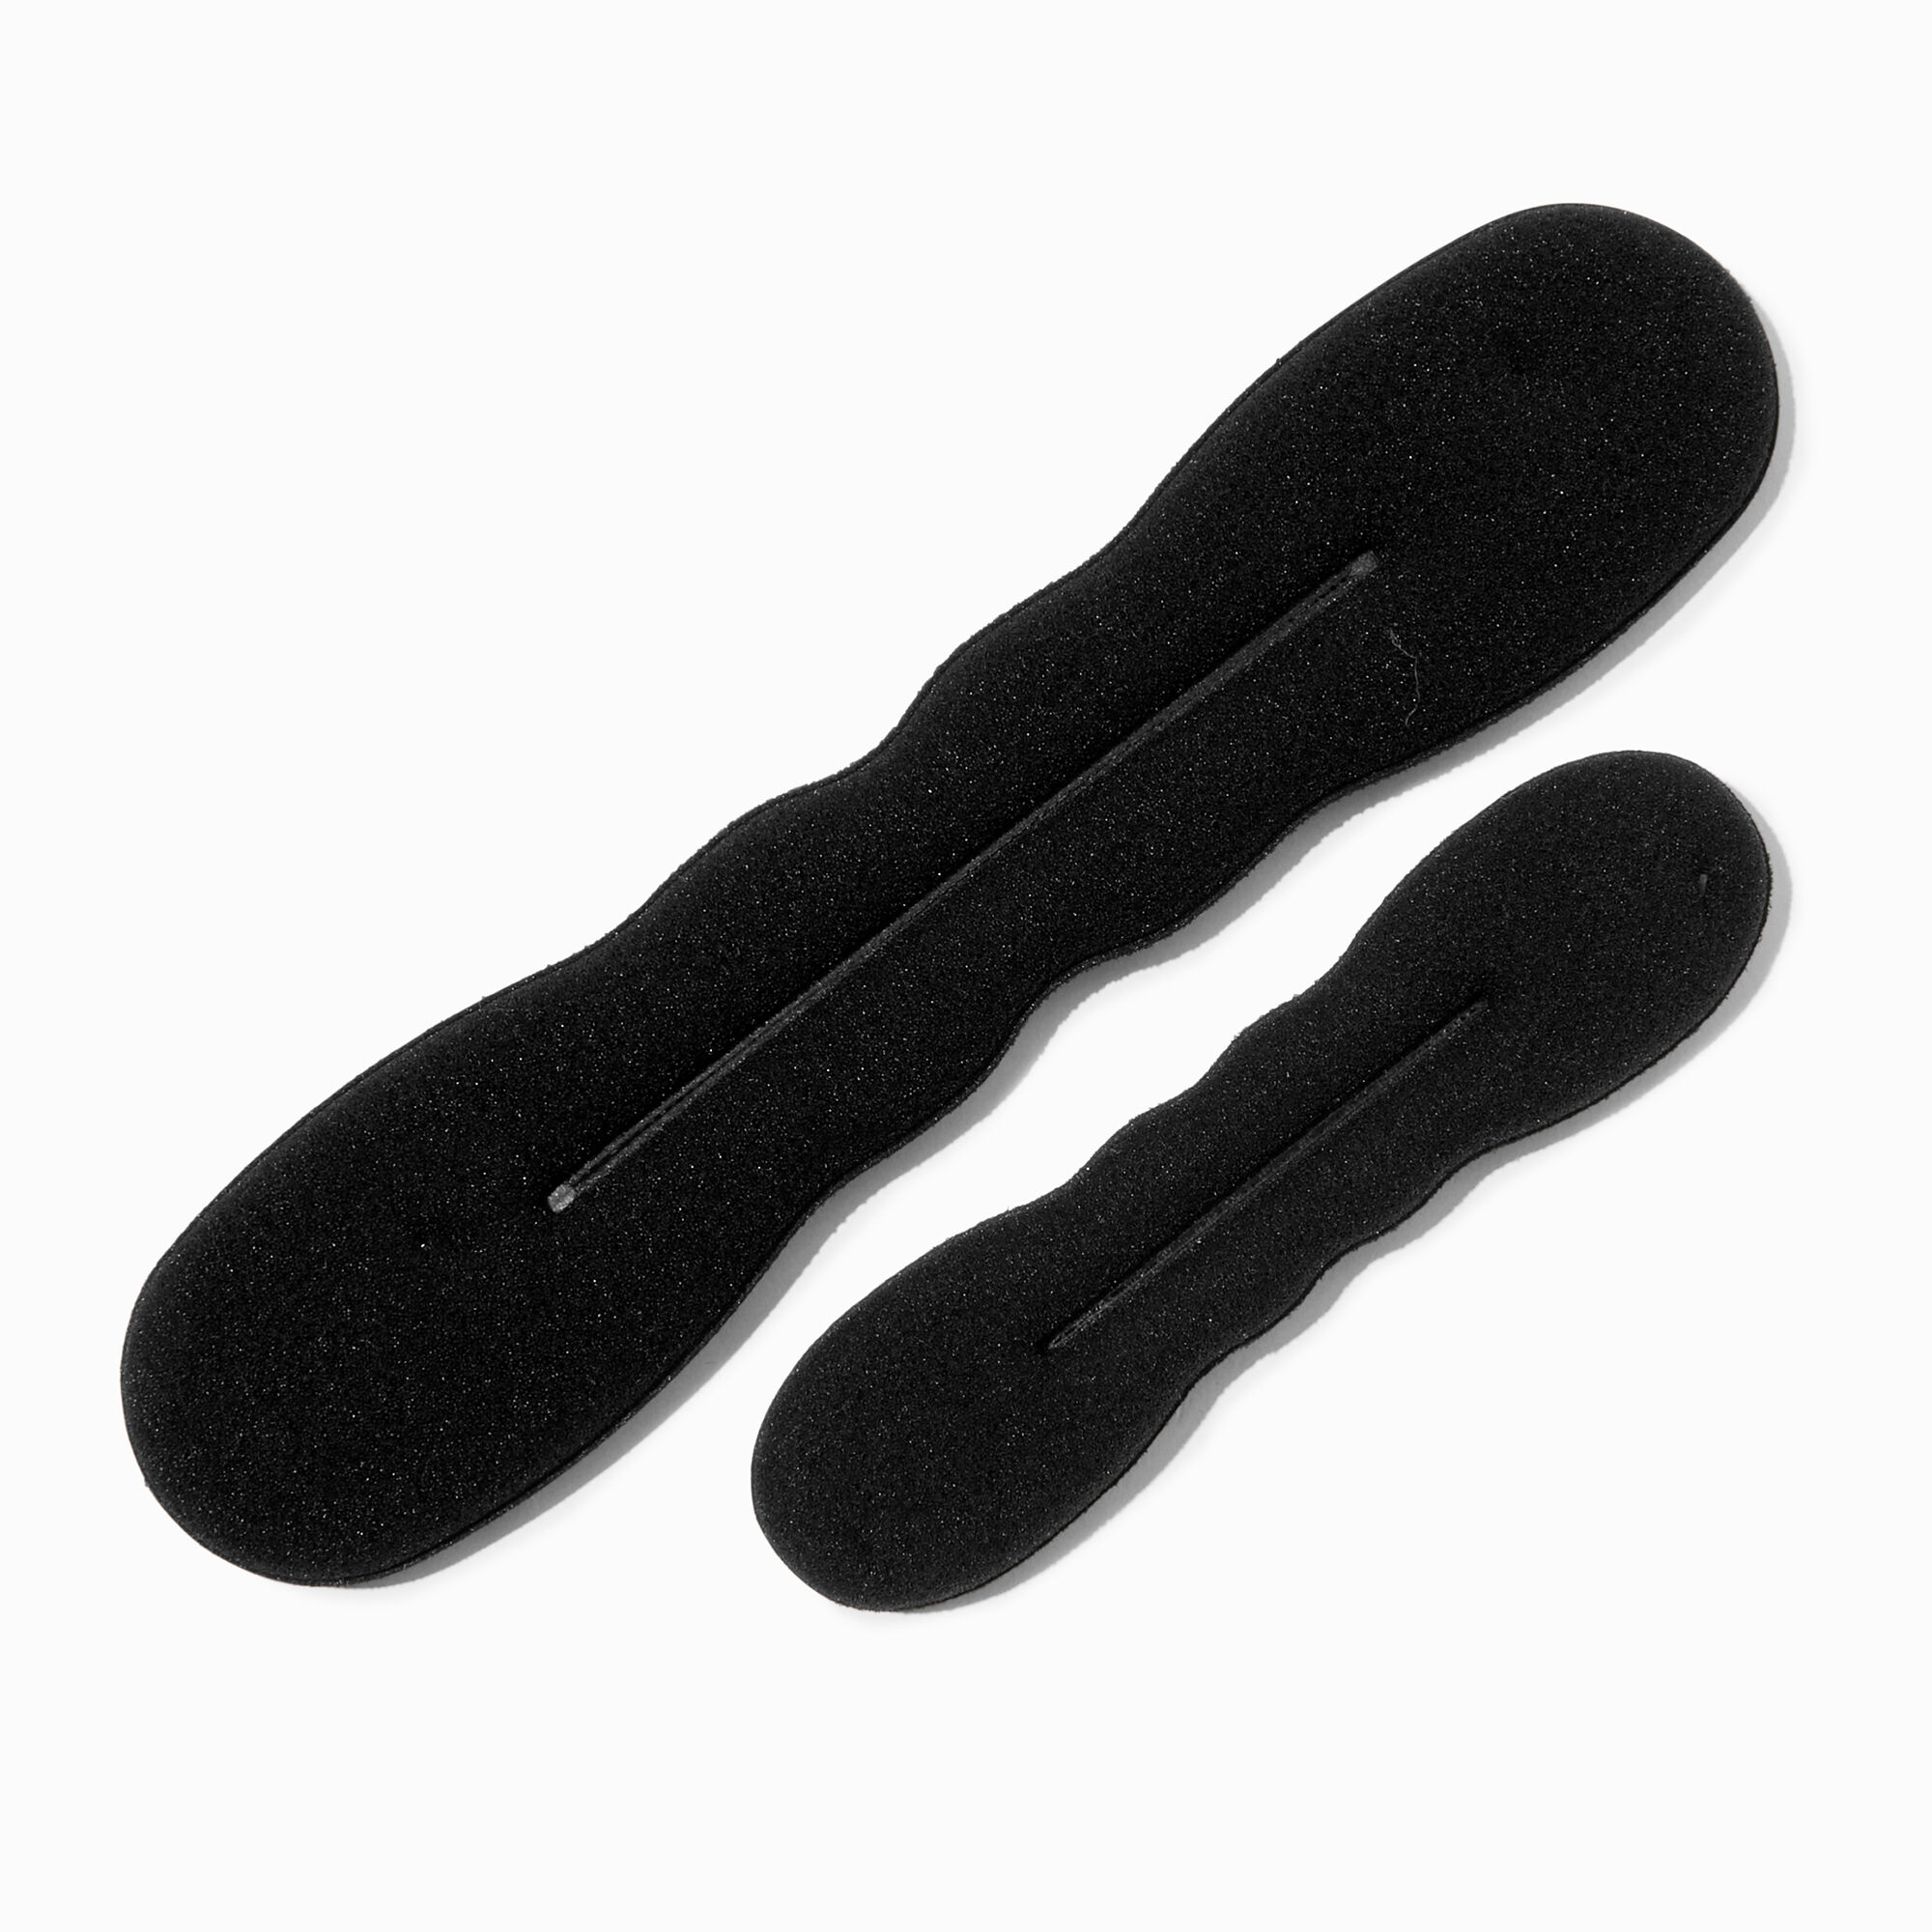 View Claires Bun Hair Rollers 2 Pack Black information